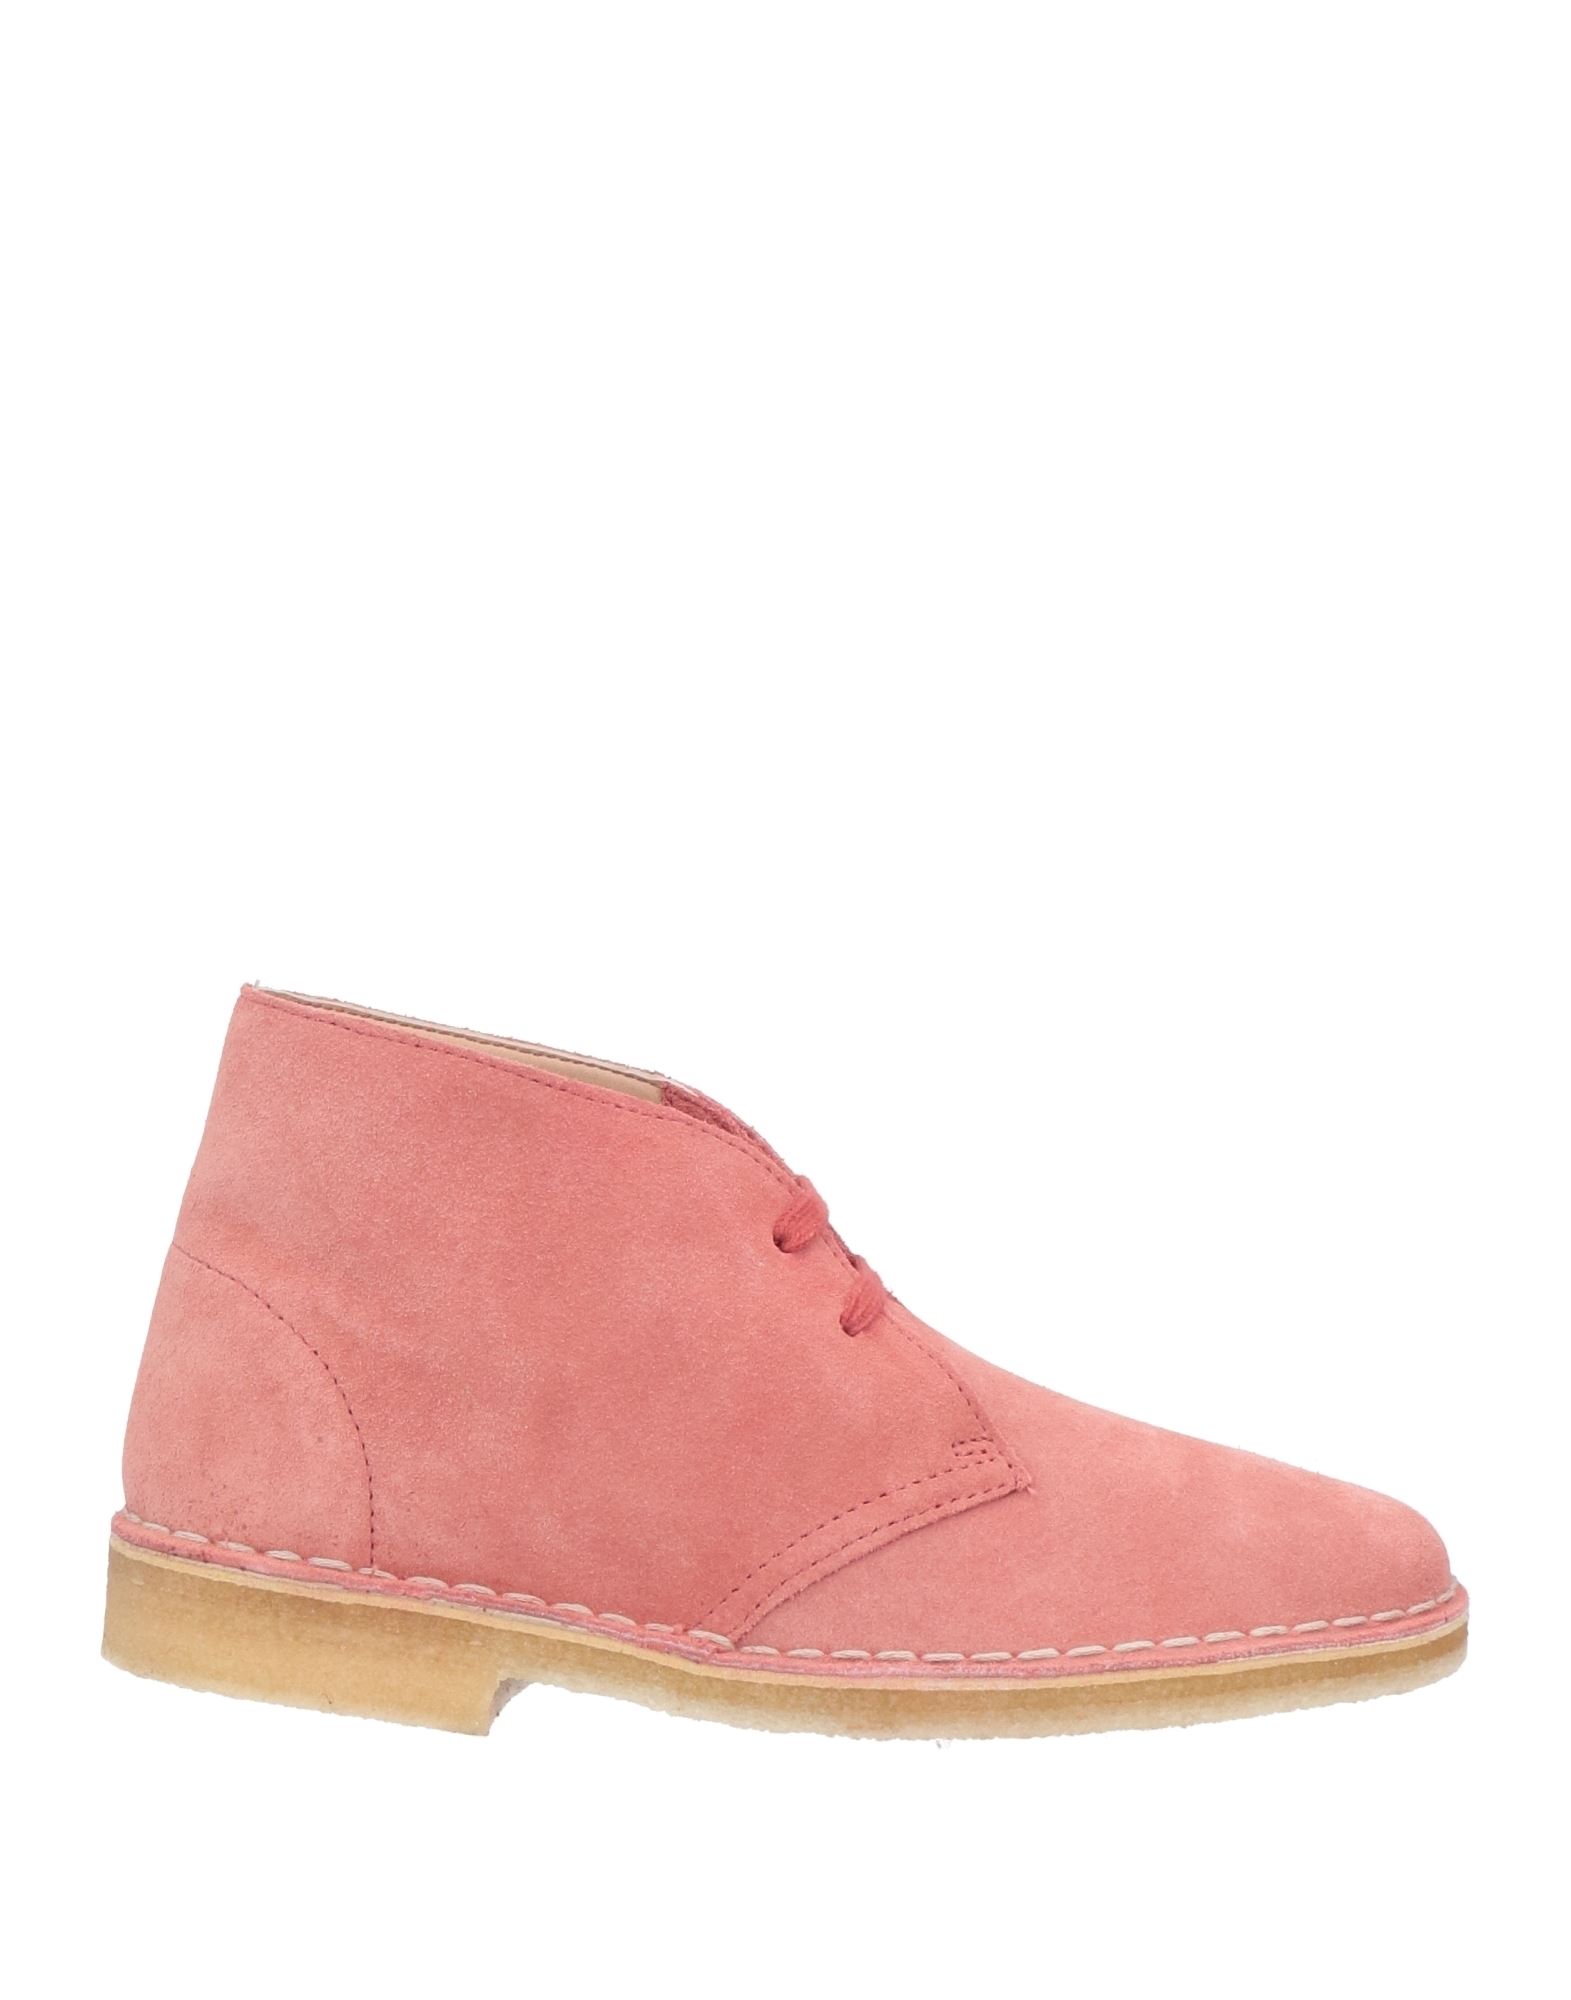 Clarks Originals Ankle Boots In Pink